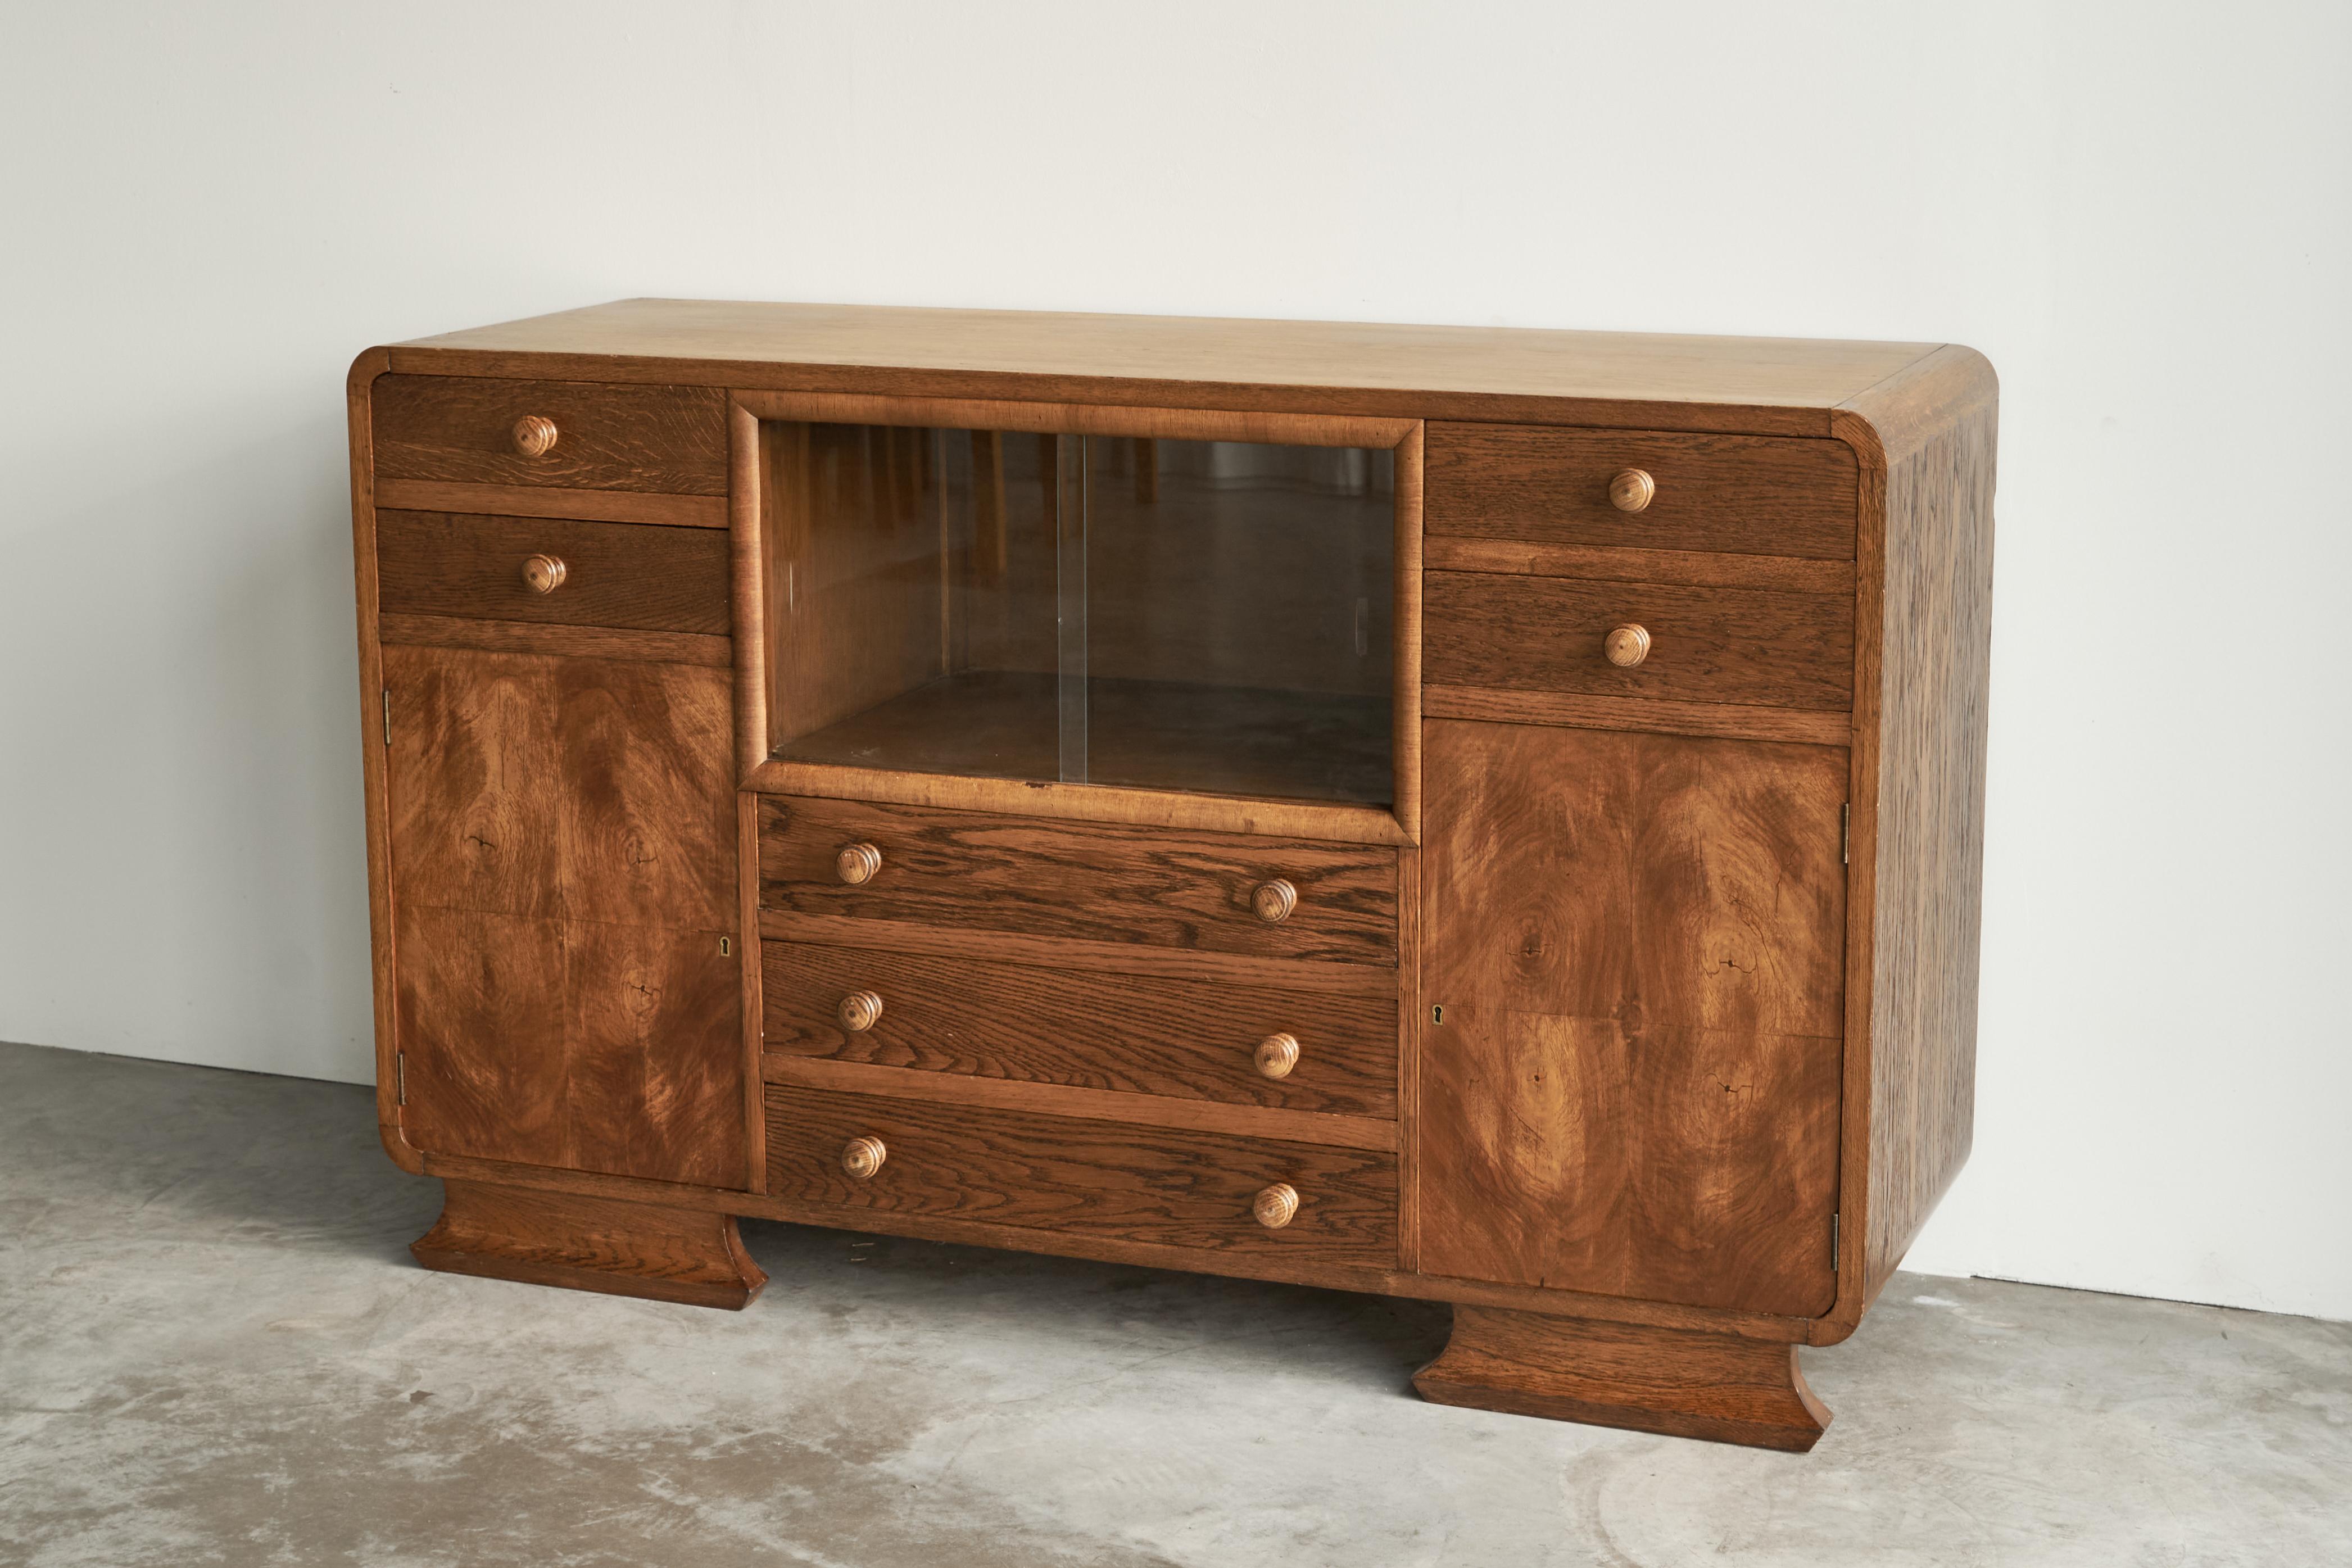 Hand-Crafted Swedish Art Deco Cabinet in Oak 1940s For Sale